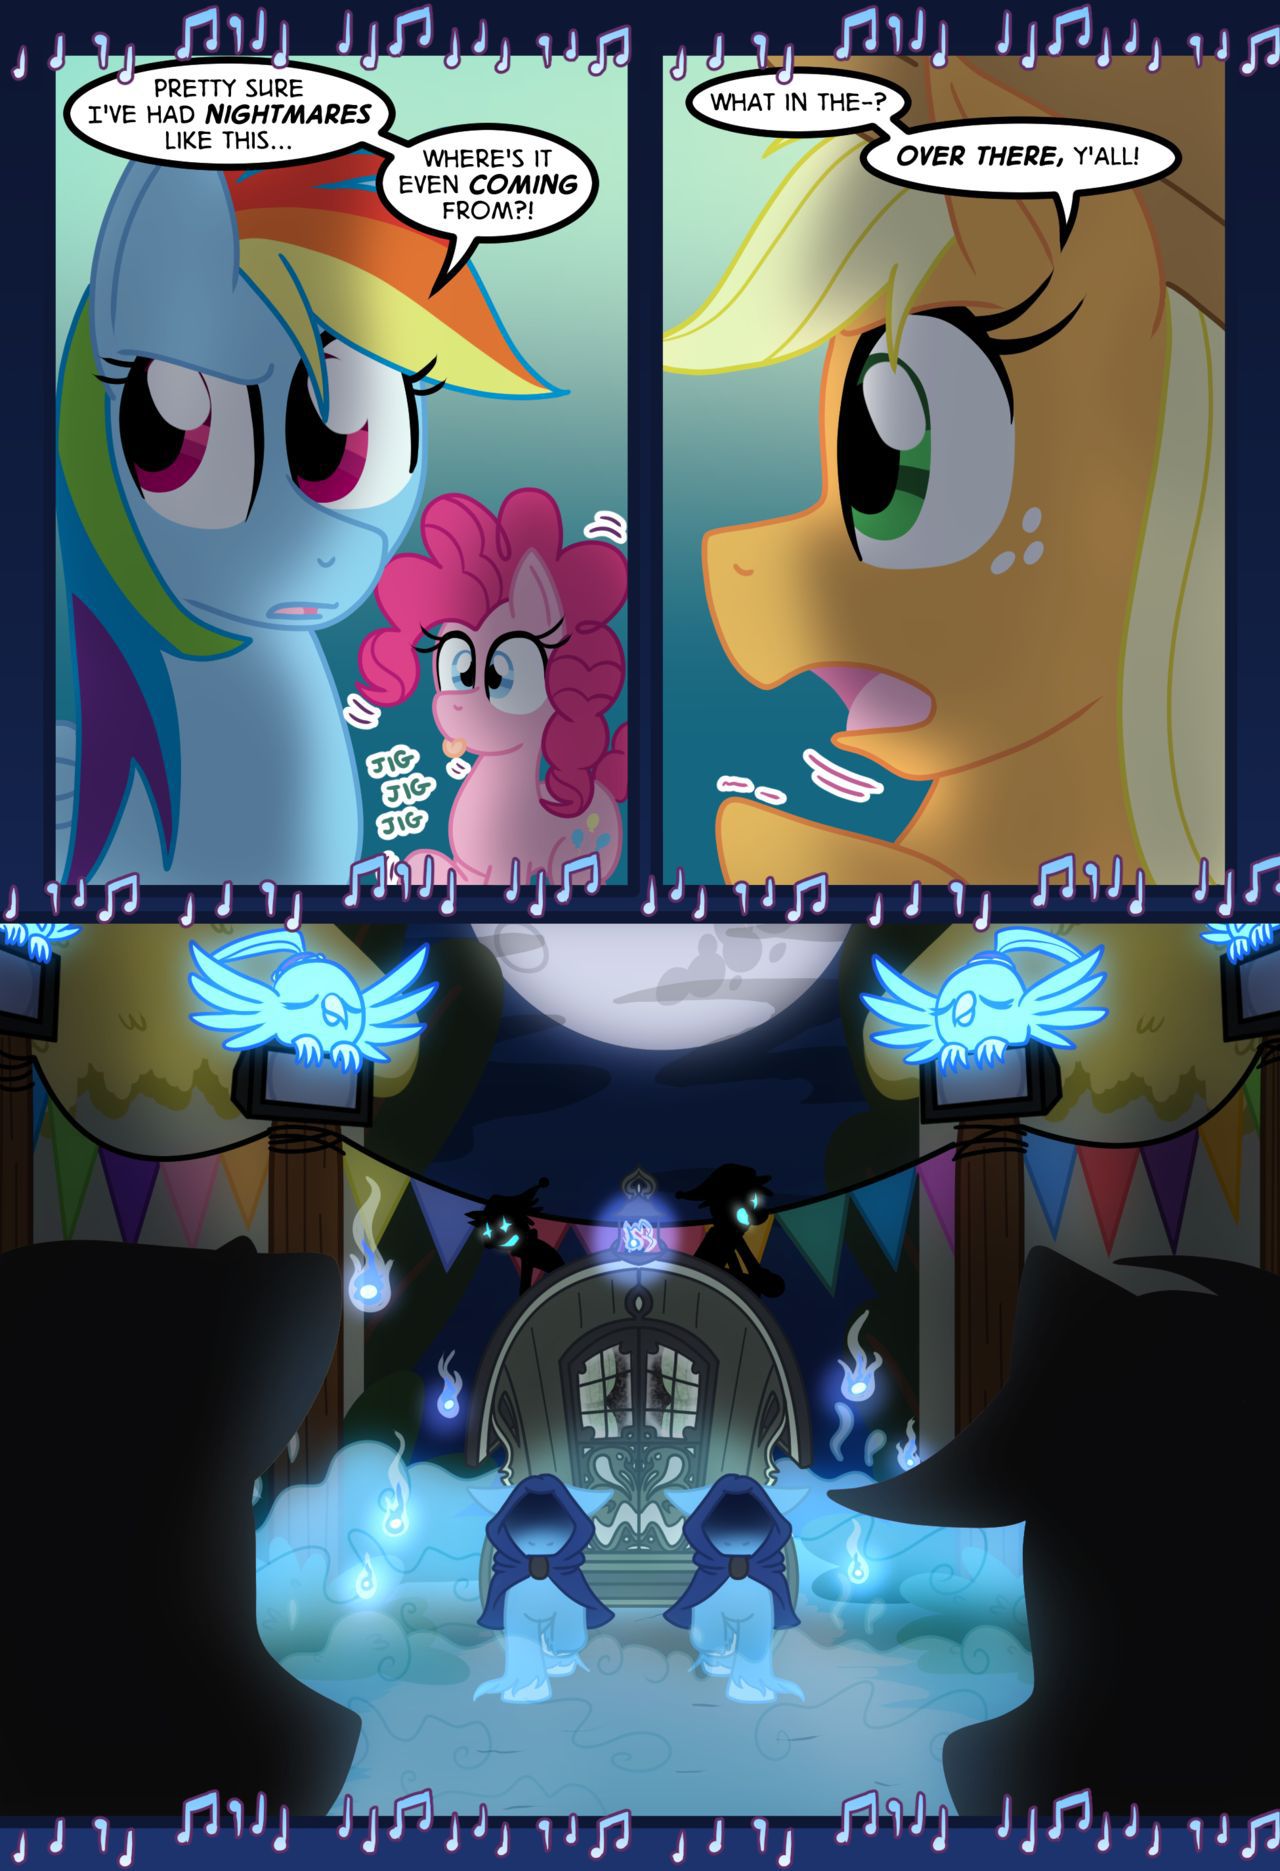 [Zaron] Lonely Hooves (My Little Pony Friendship Is Magic) [Ongoing] 113